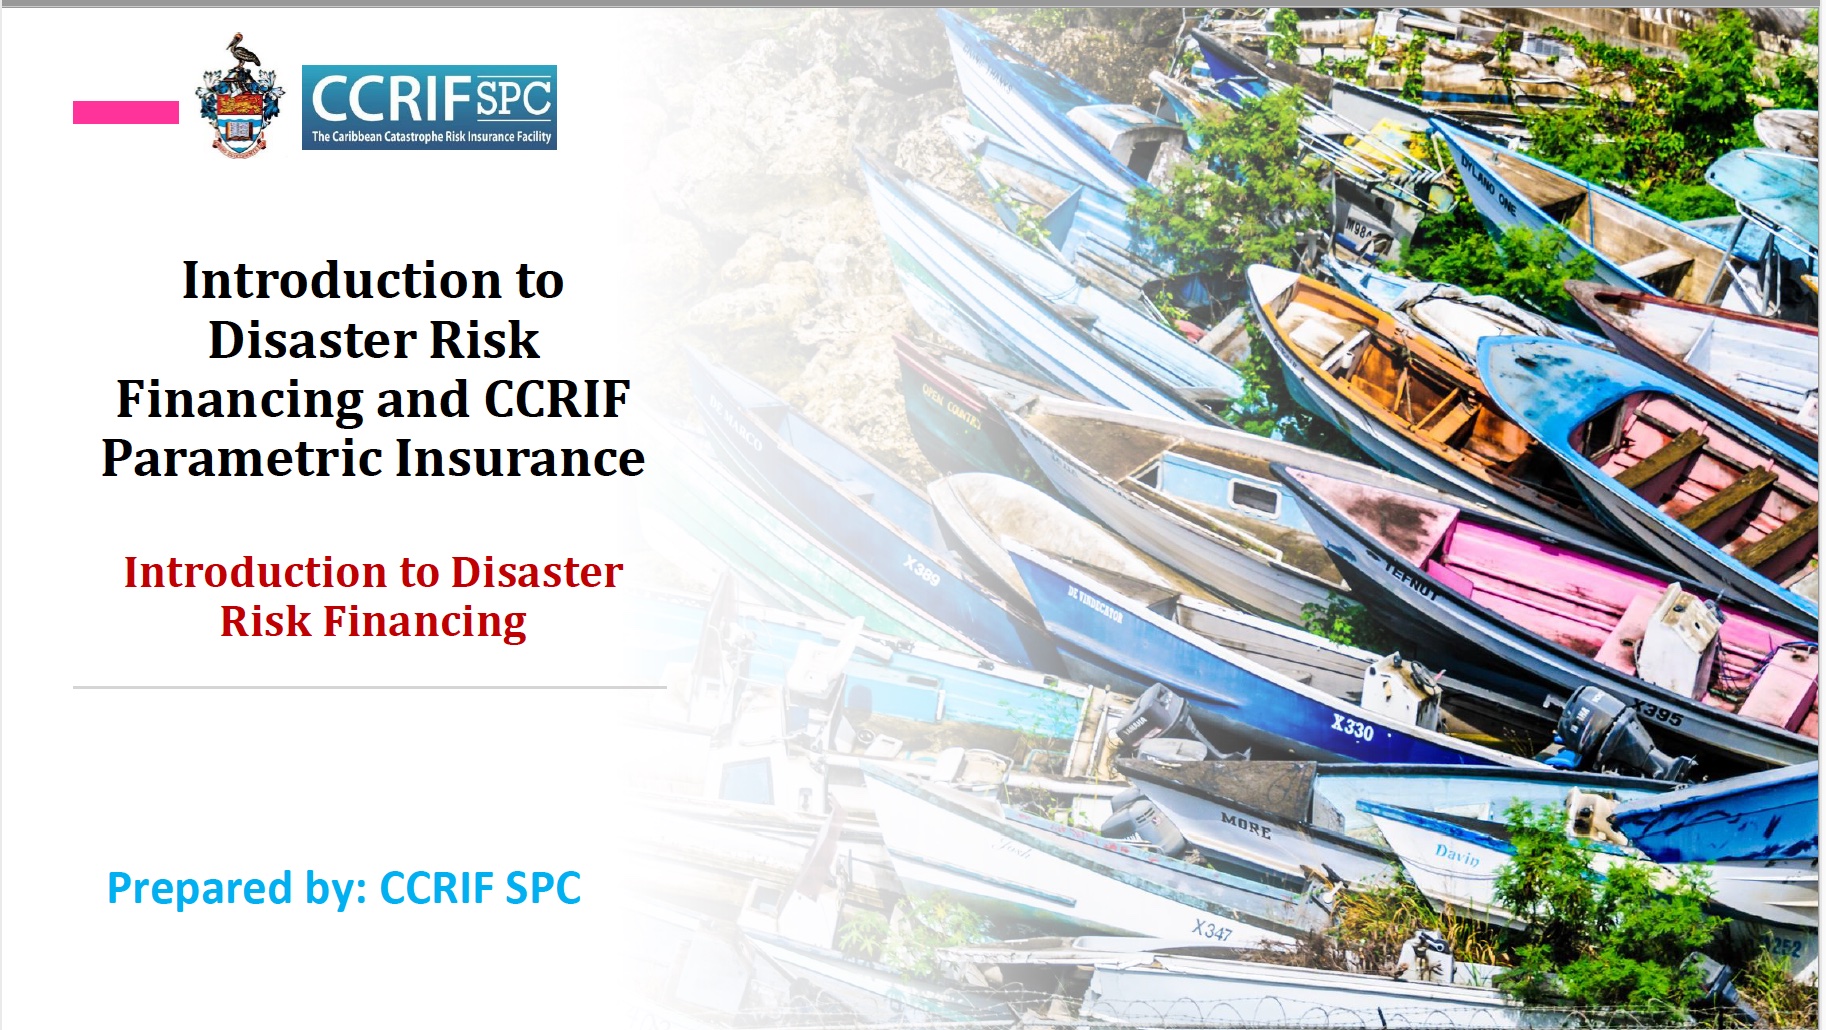 Day 4 - Presentation - Introduction to Disaster Risk Financing and CCRIF Parametric Insurance